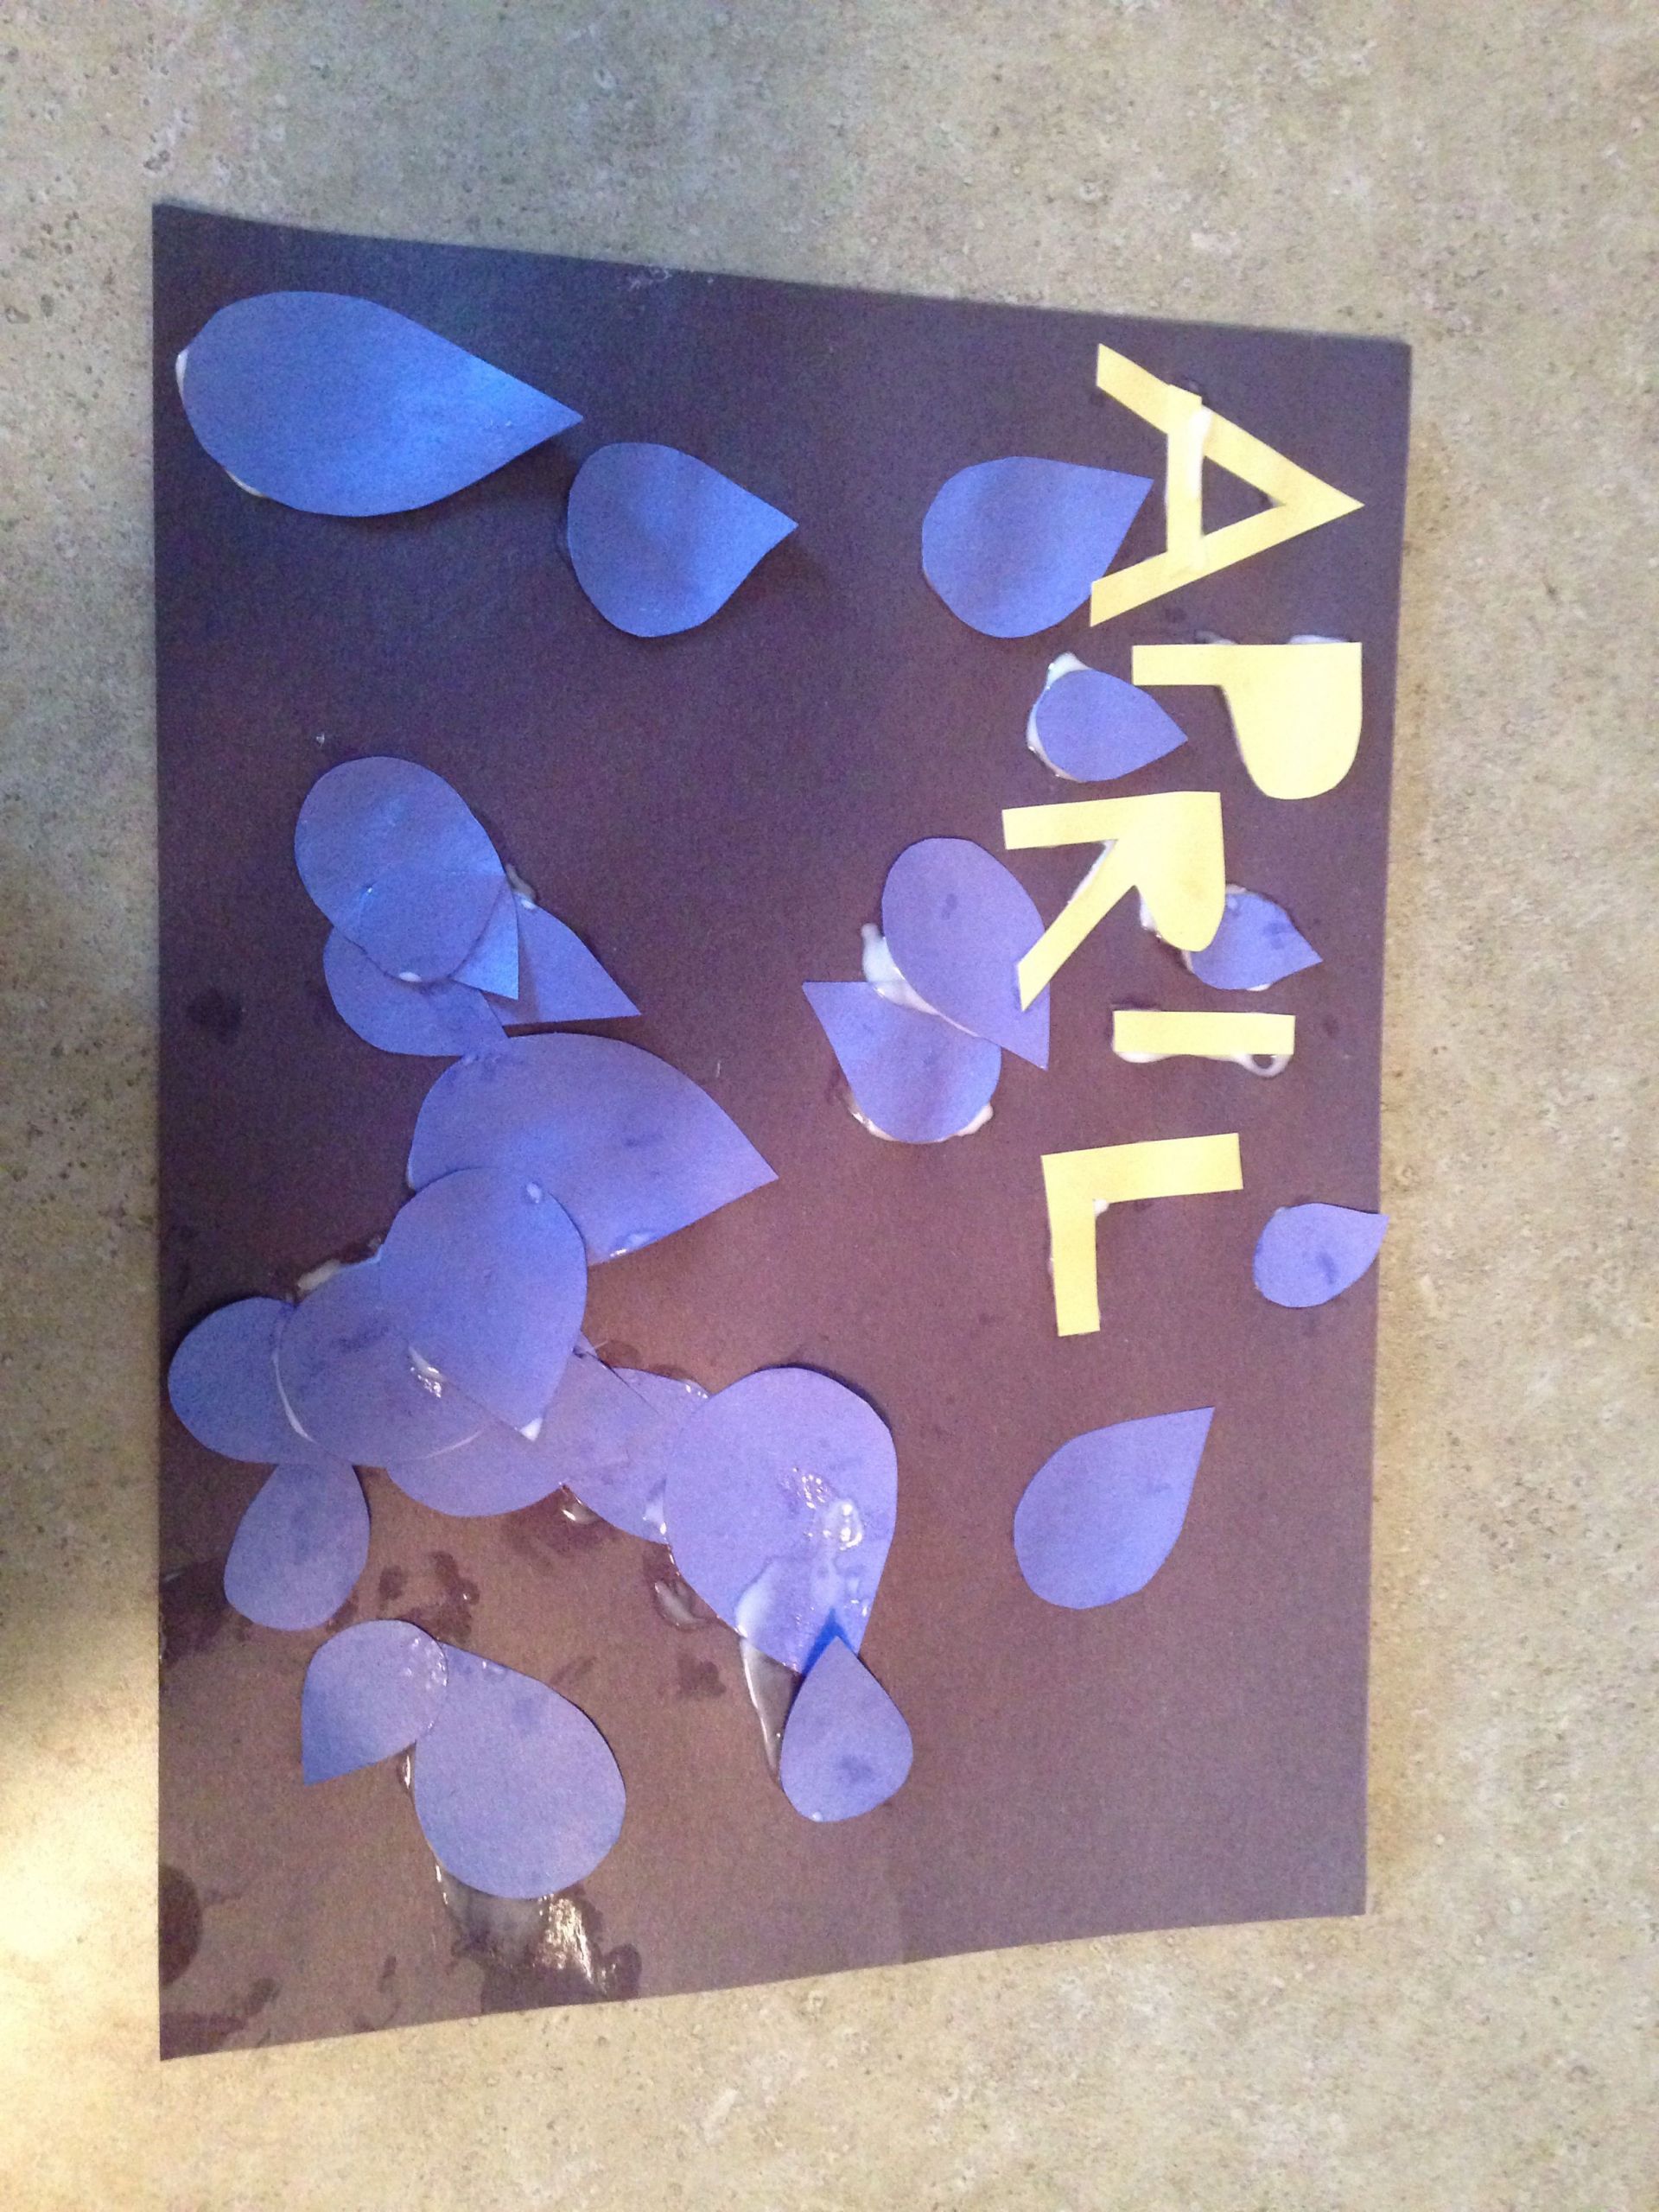 April Preschool Crafts
 April showers craft for toddlers With images